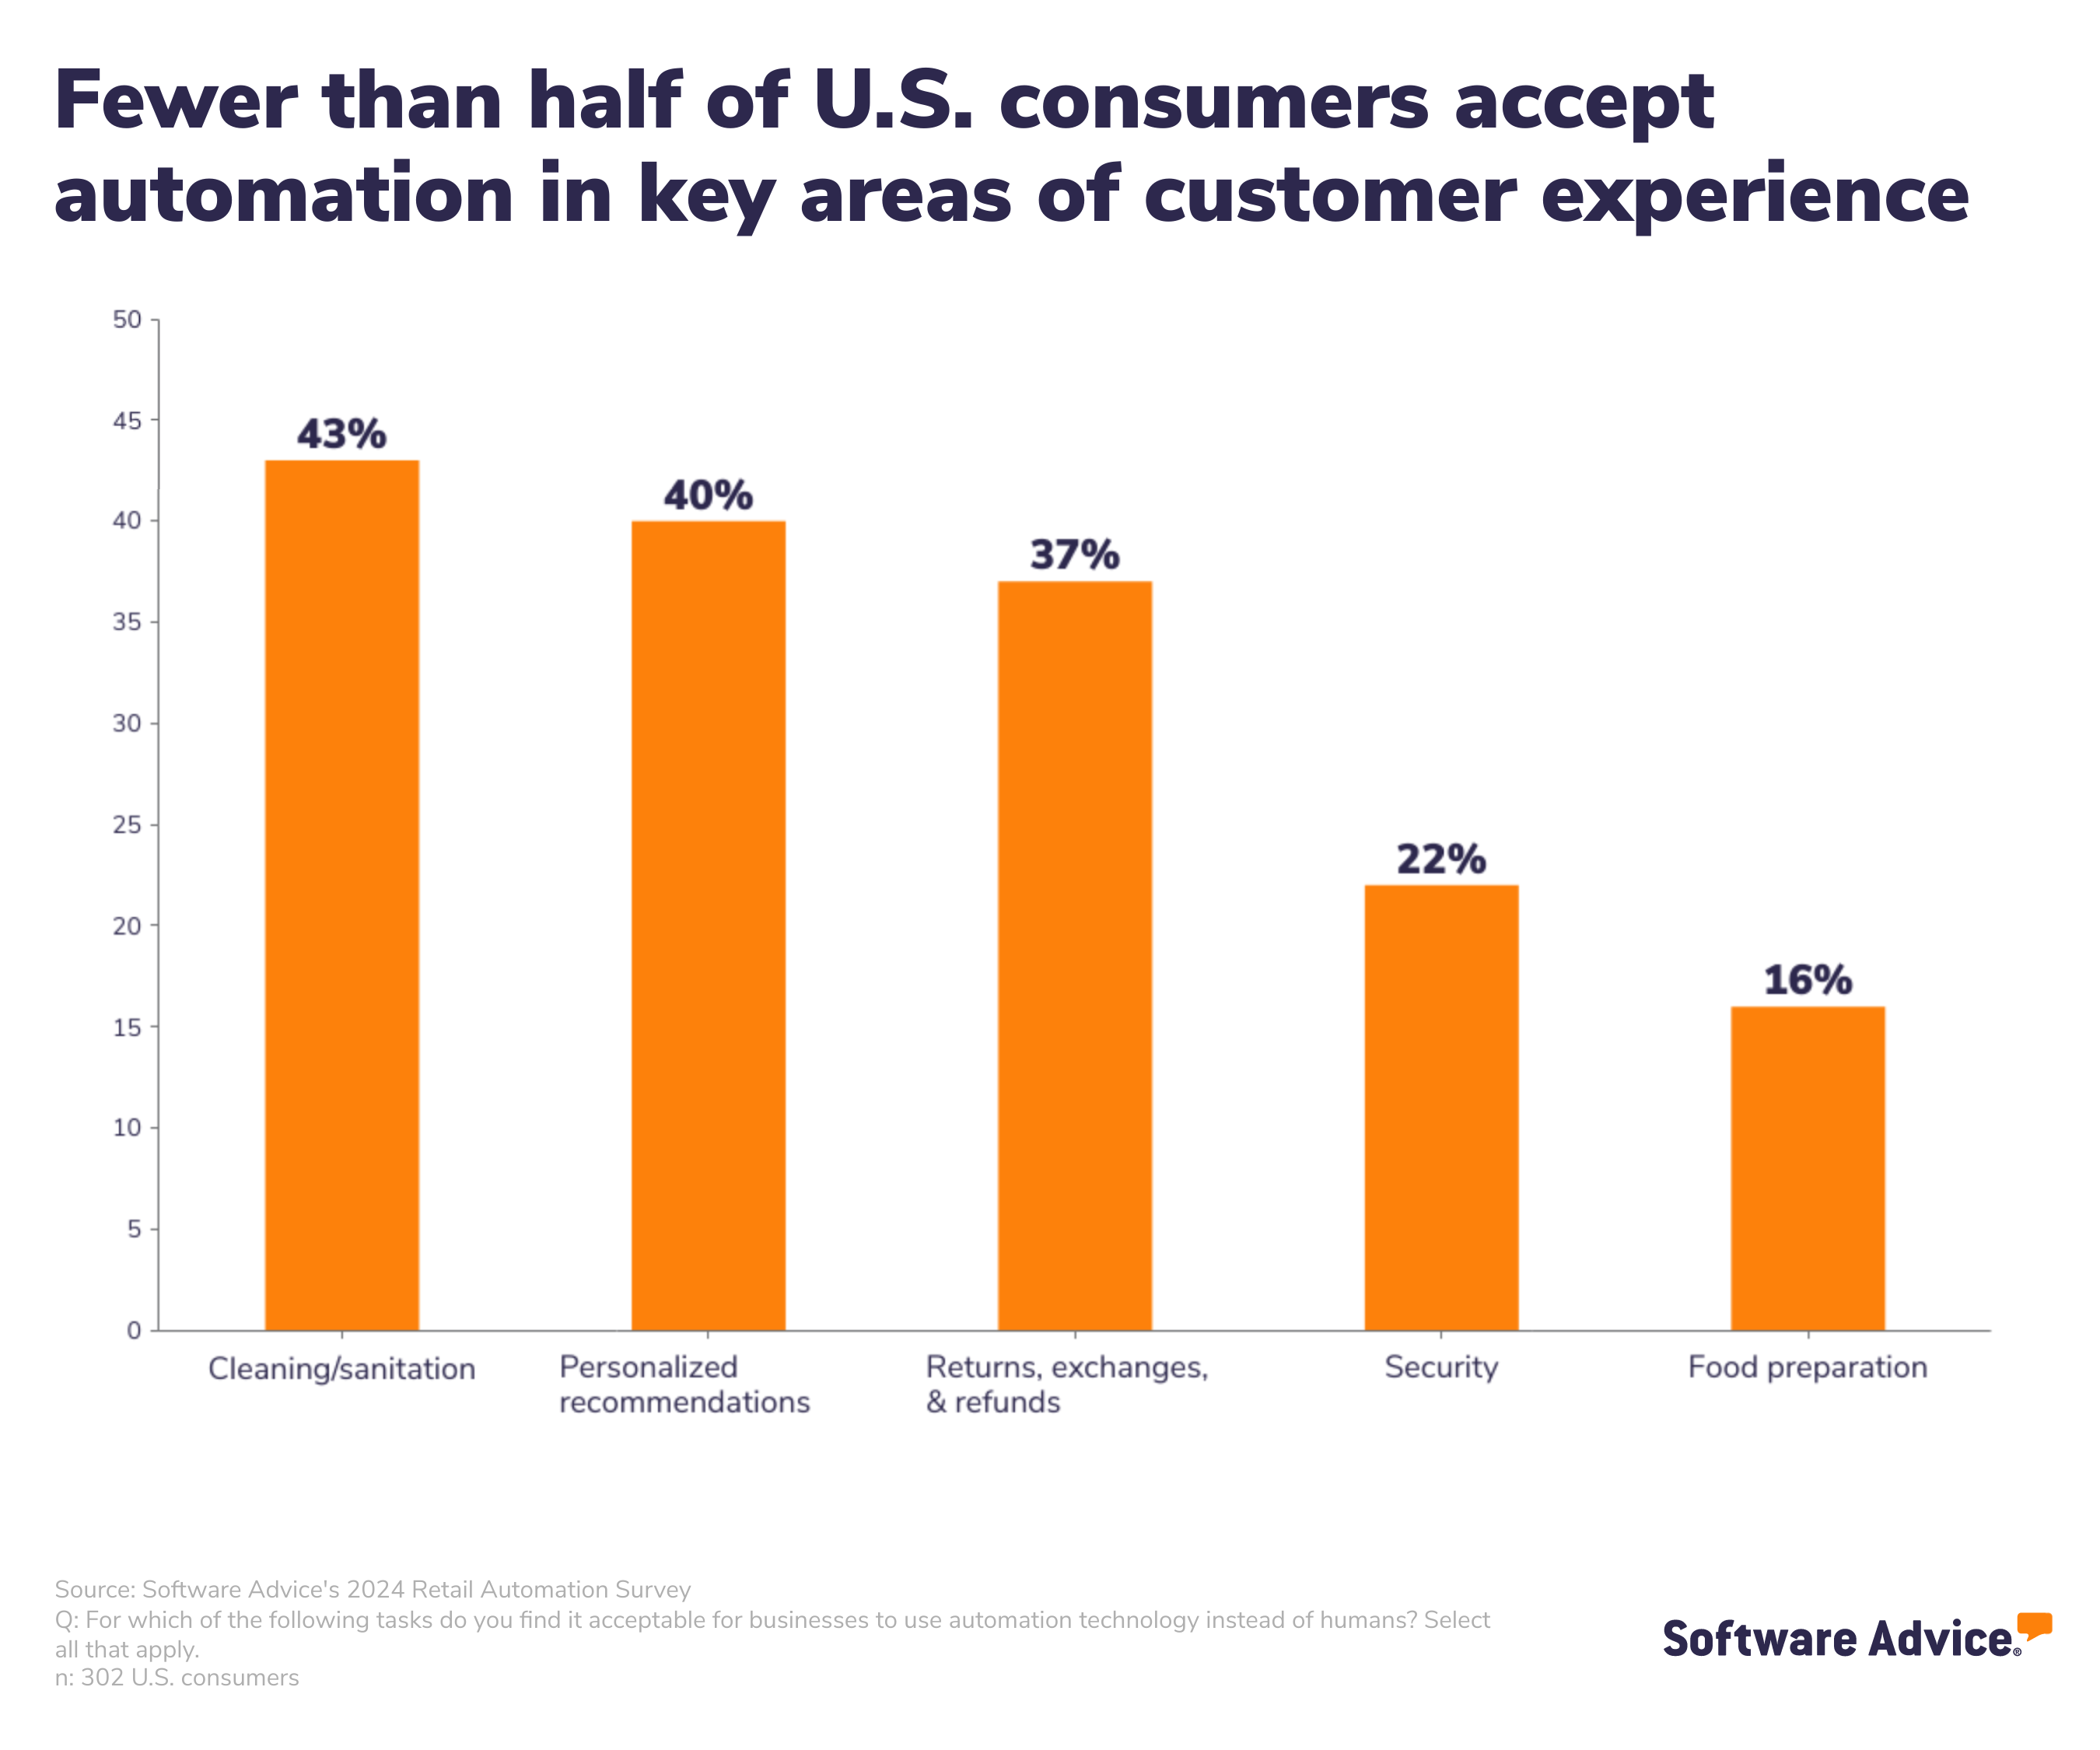 Fewer than half of U.S. consumers accept automation in key areas of customer experience.